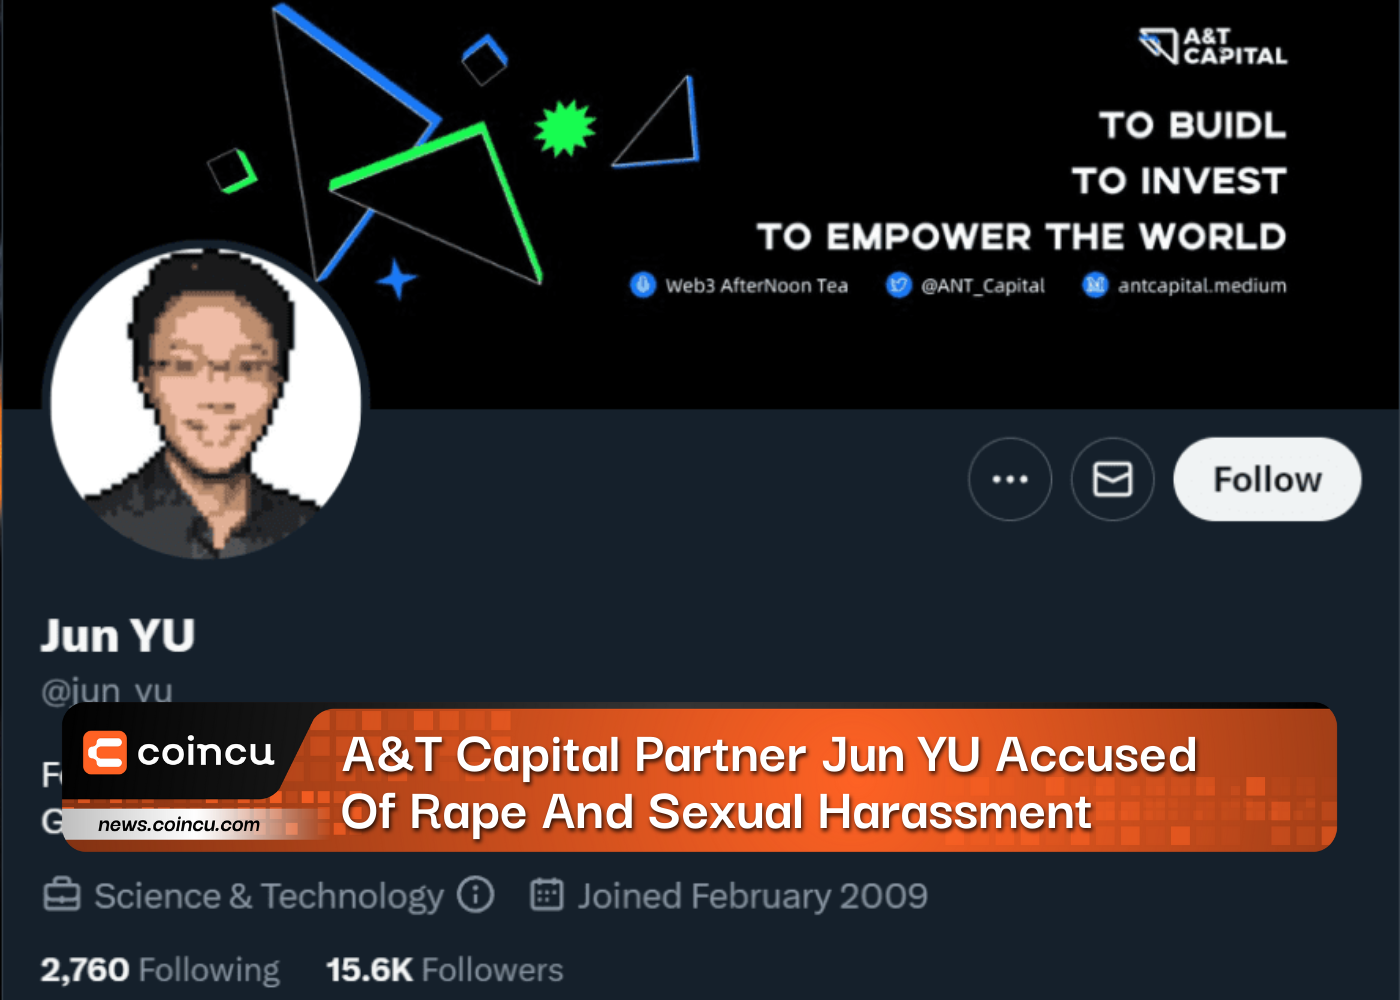 A&T Capital Partner Jun YU Accused Of Rape And Sexual Harassment